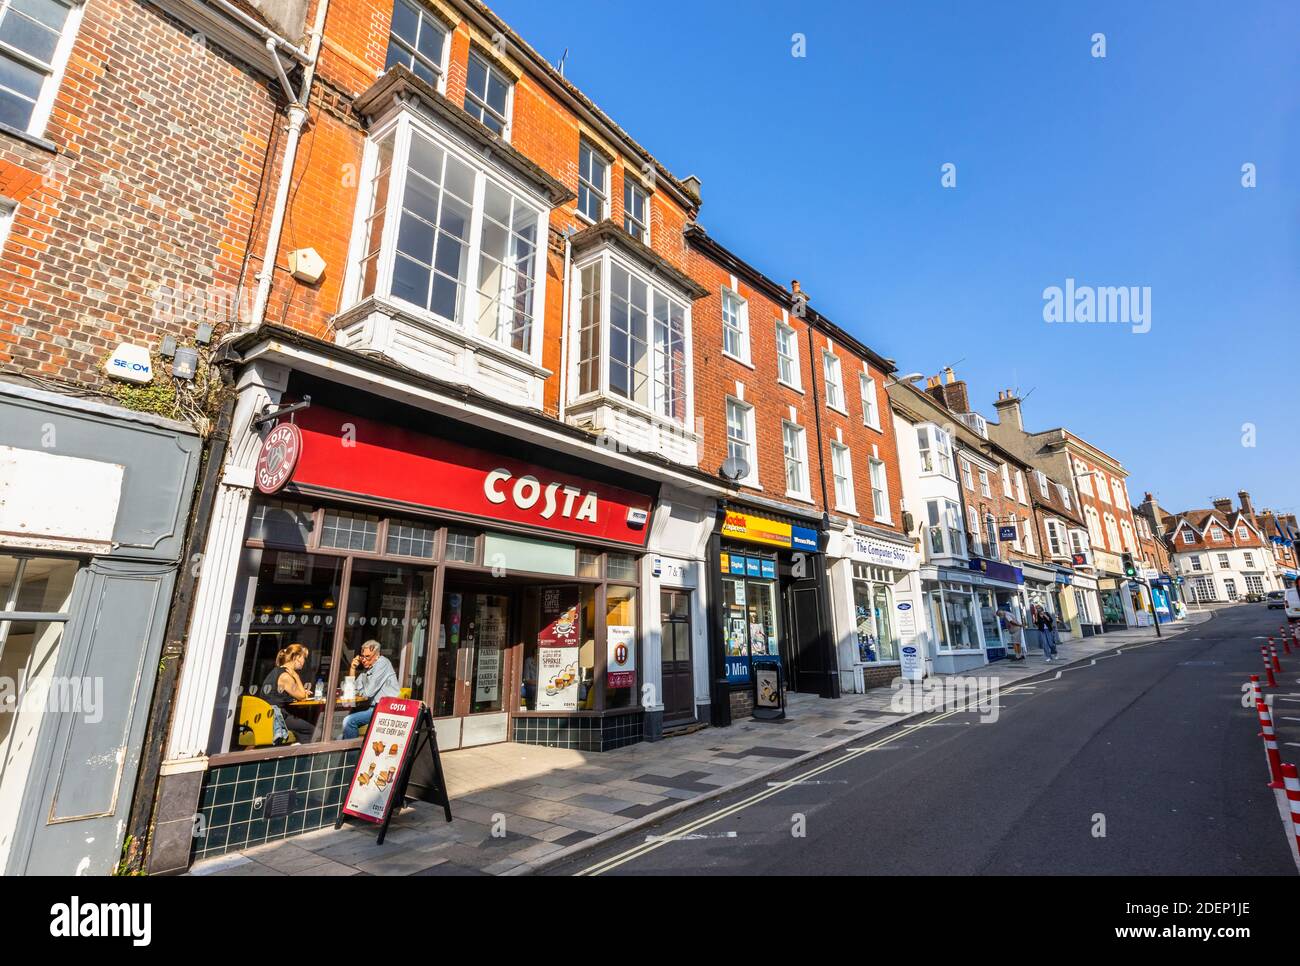 Small shops in Salisbury Street, Blandford Forum, a traditional market town in Dorset, south-west England, with typical Georgian architecture Stock Photo